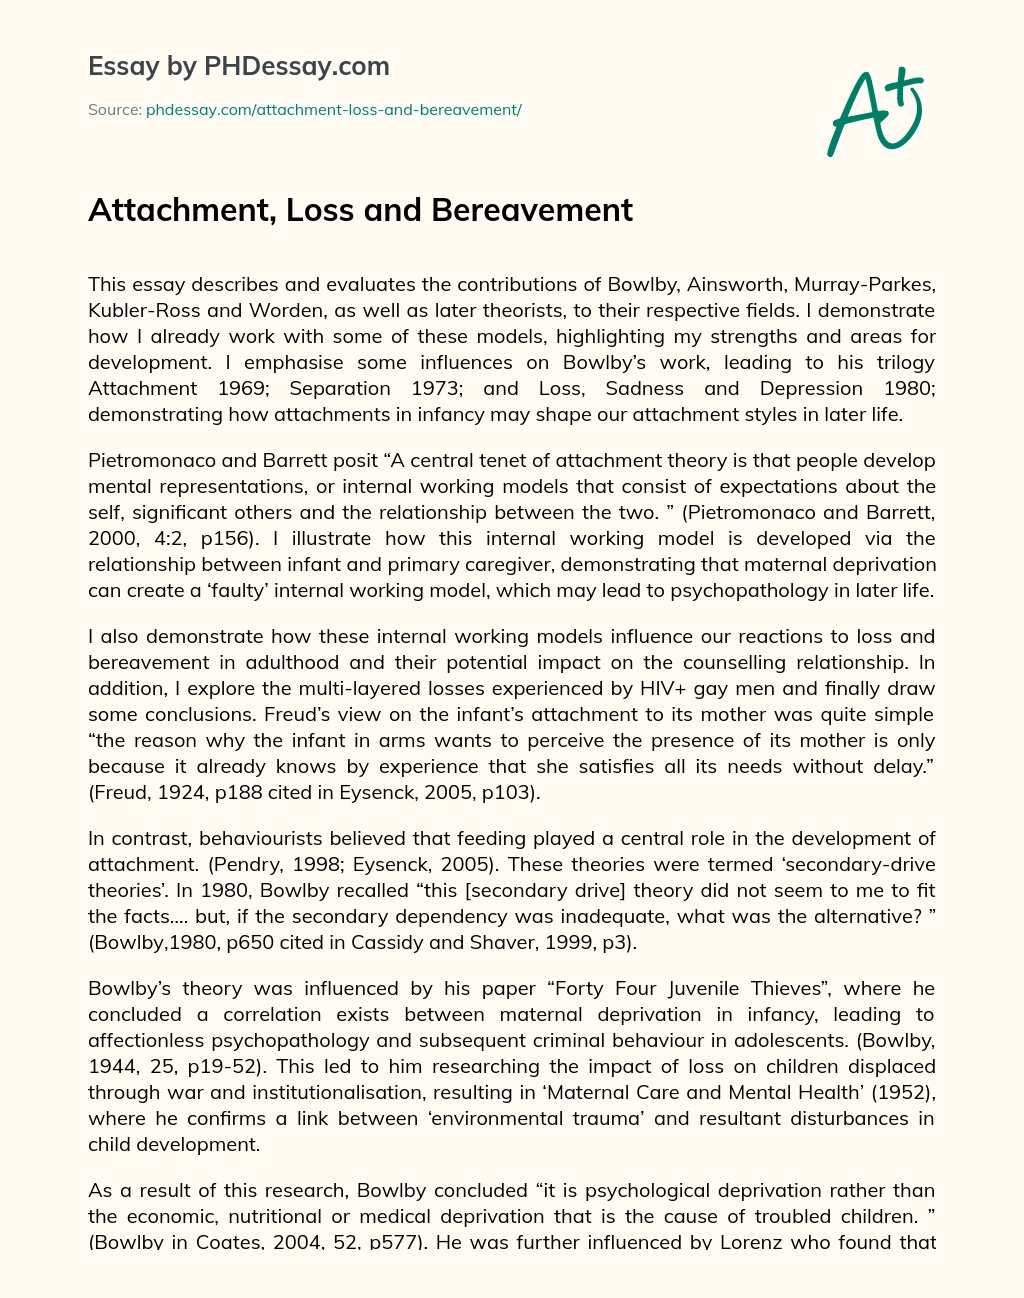 Attachment, Loss and Bereavement essay